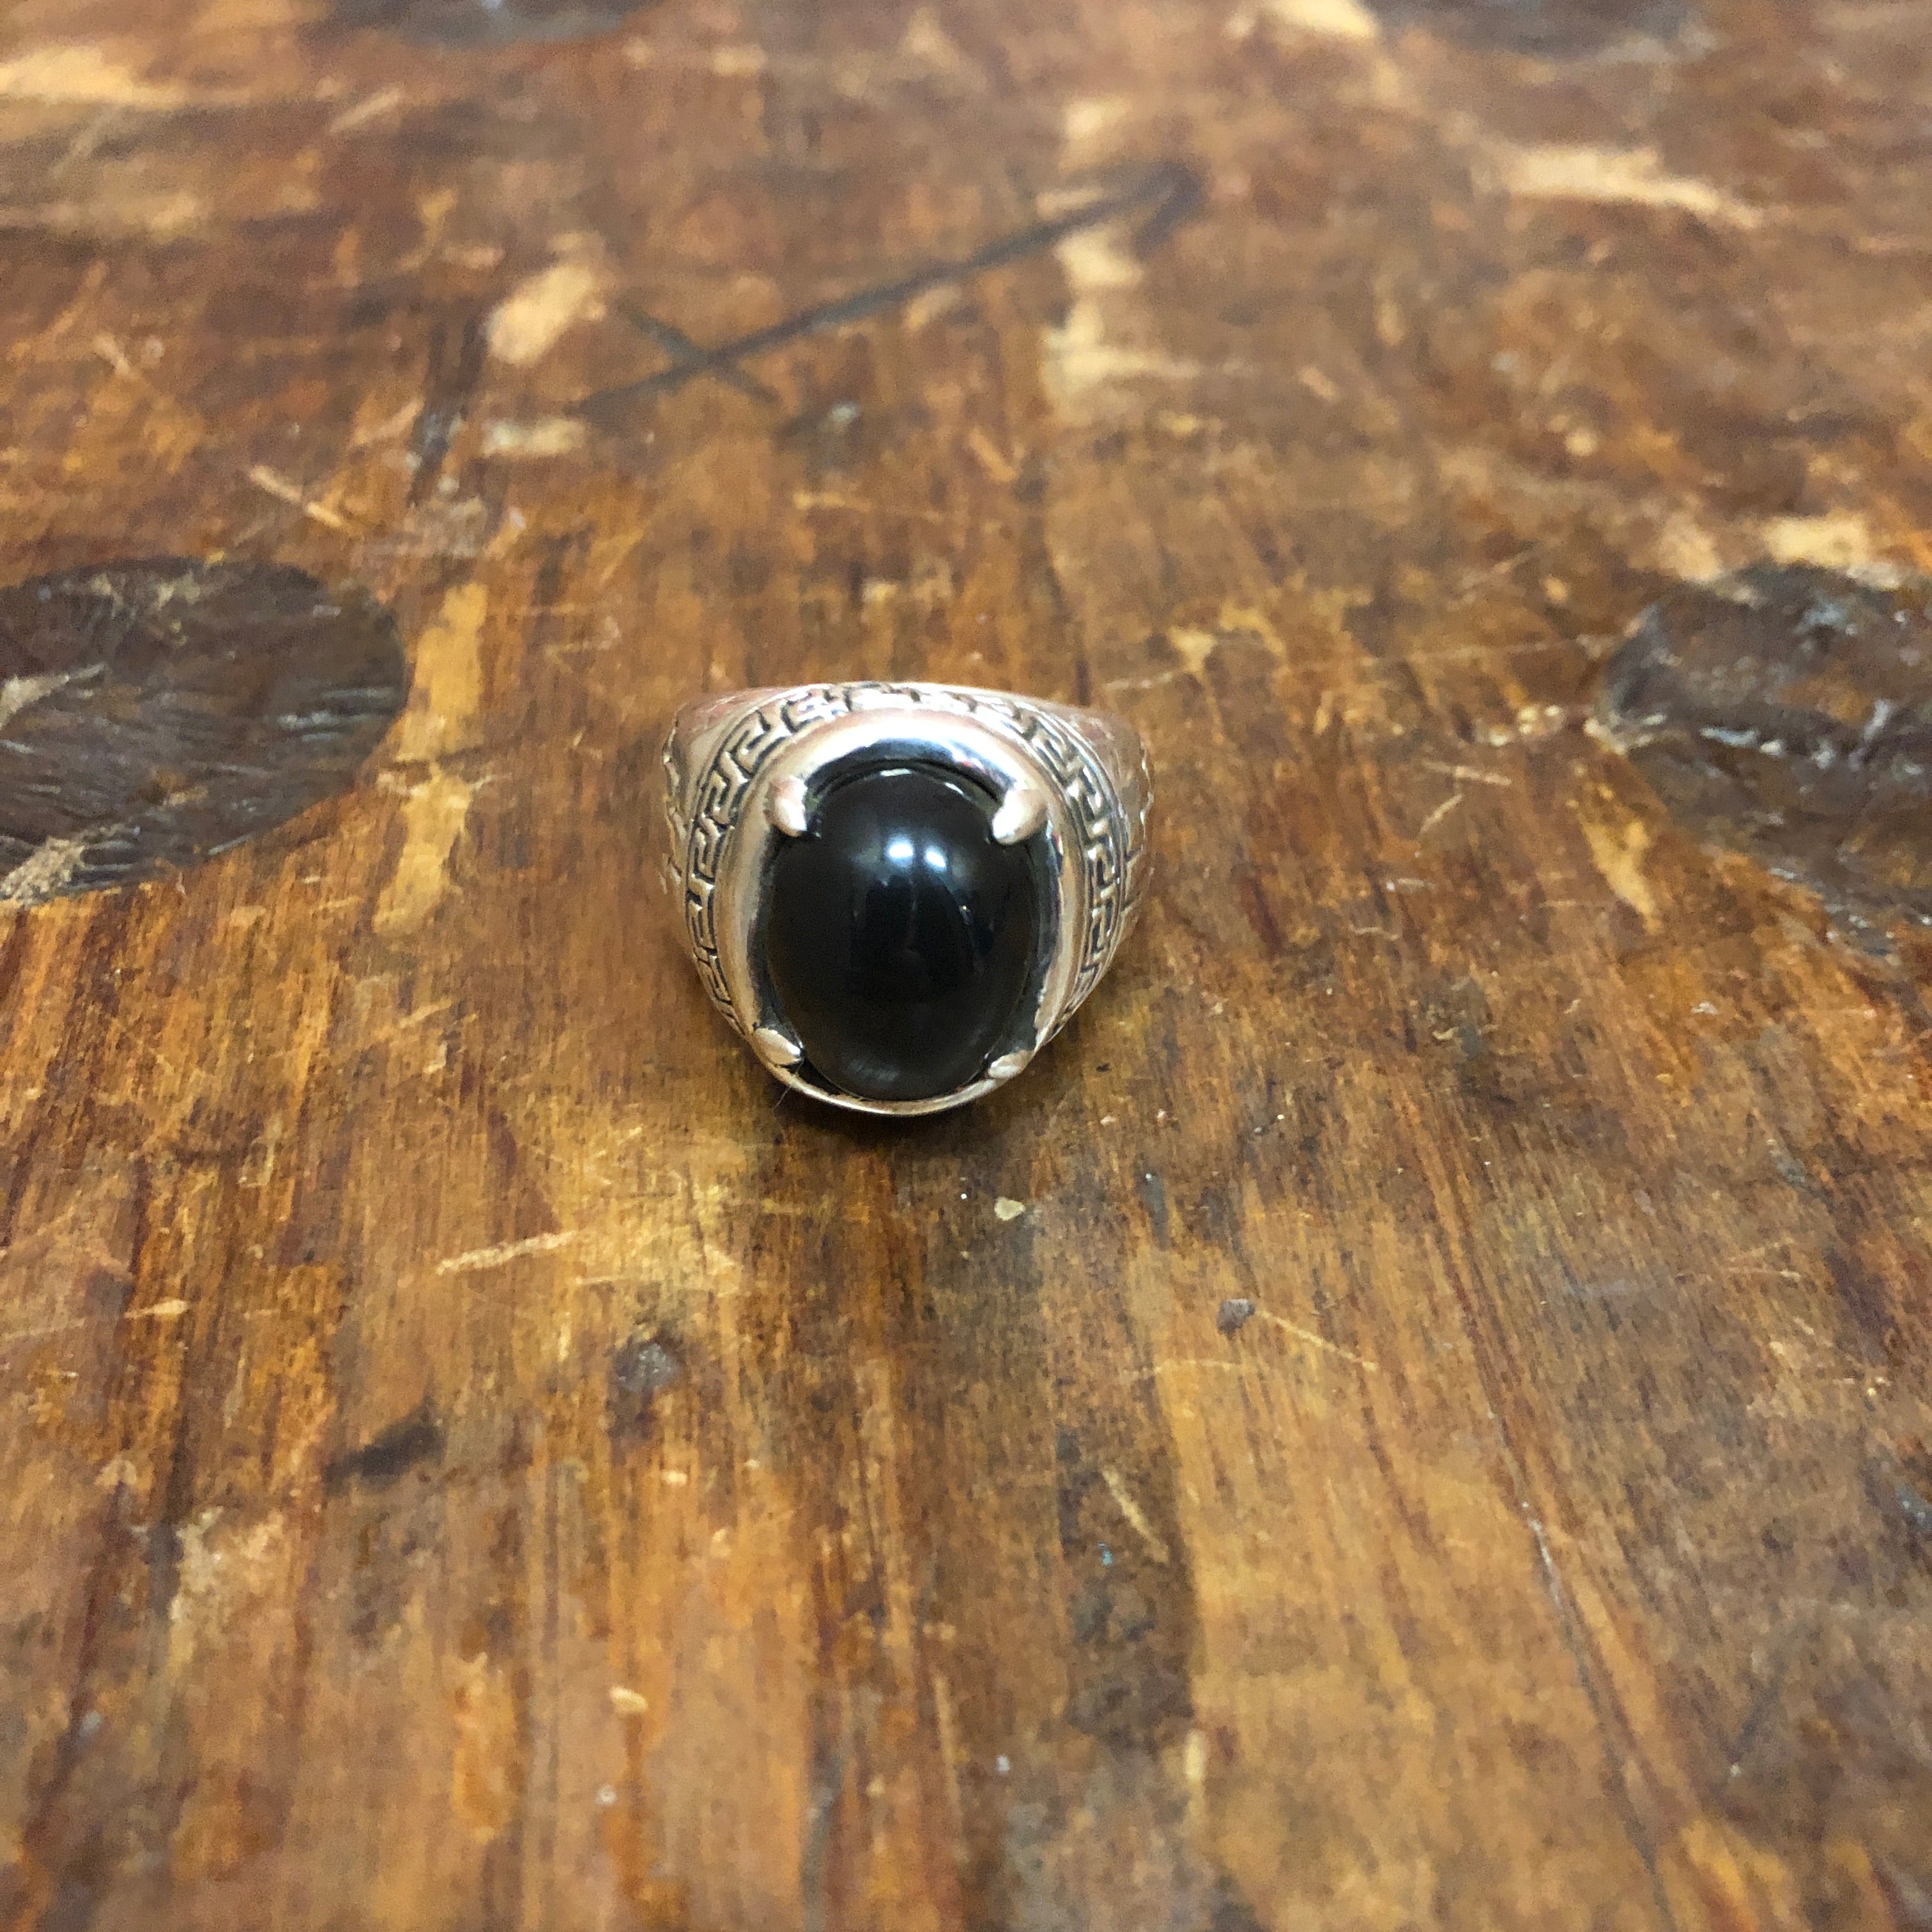 HUGE sterling silver and black stone ring